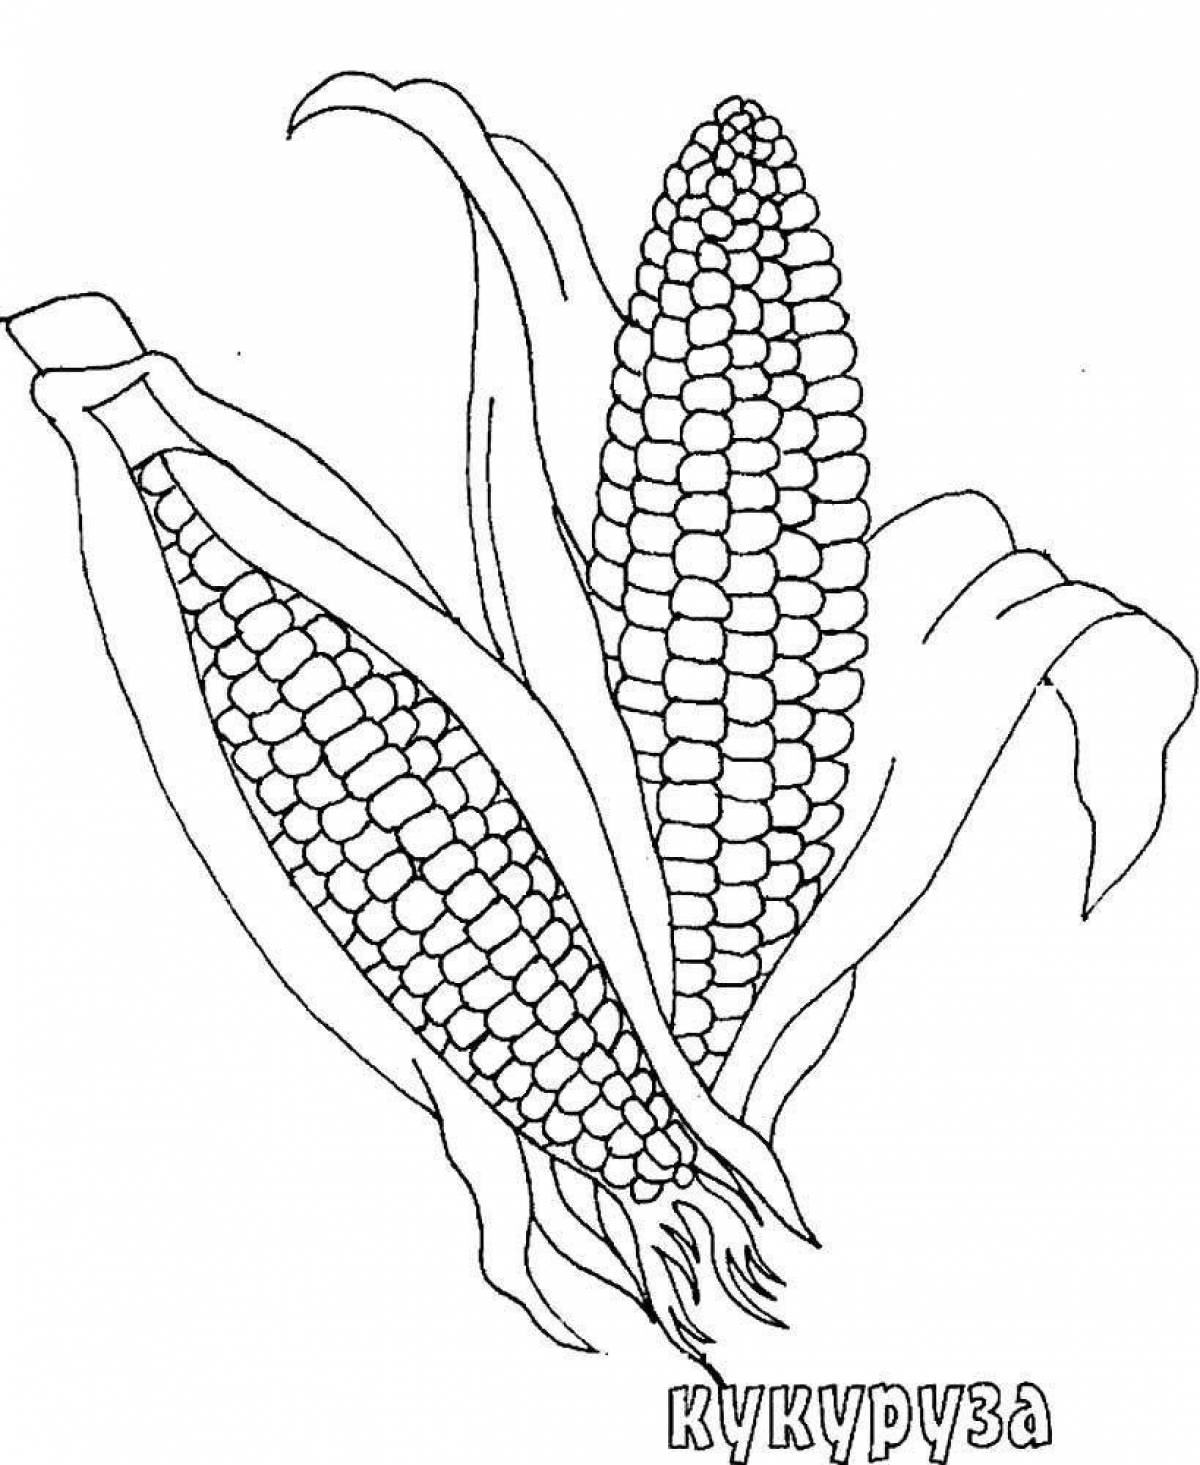 Adorable corn coloring page for kids